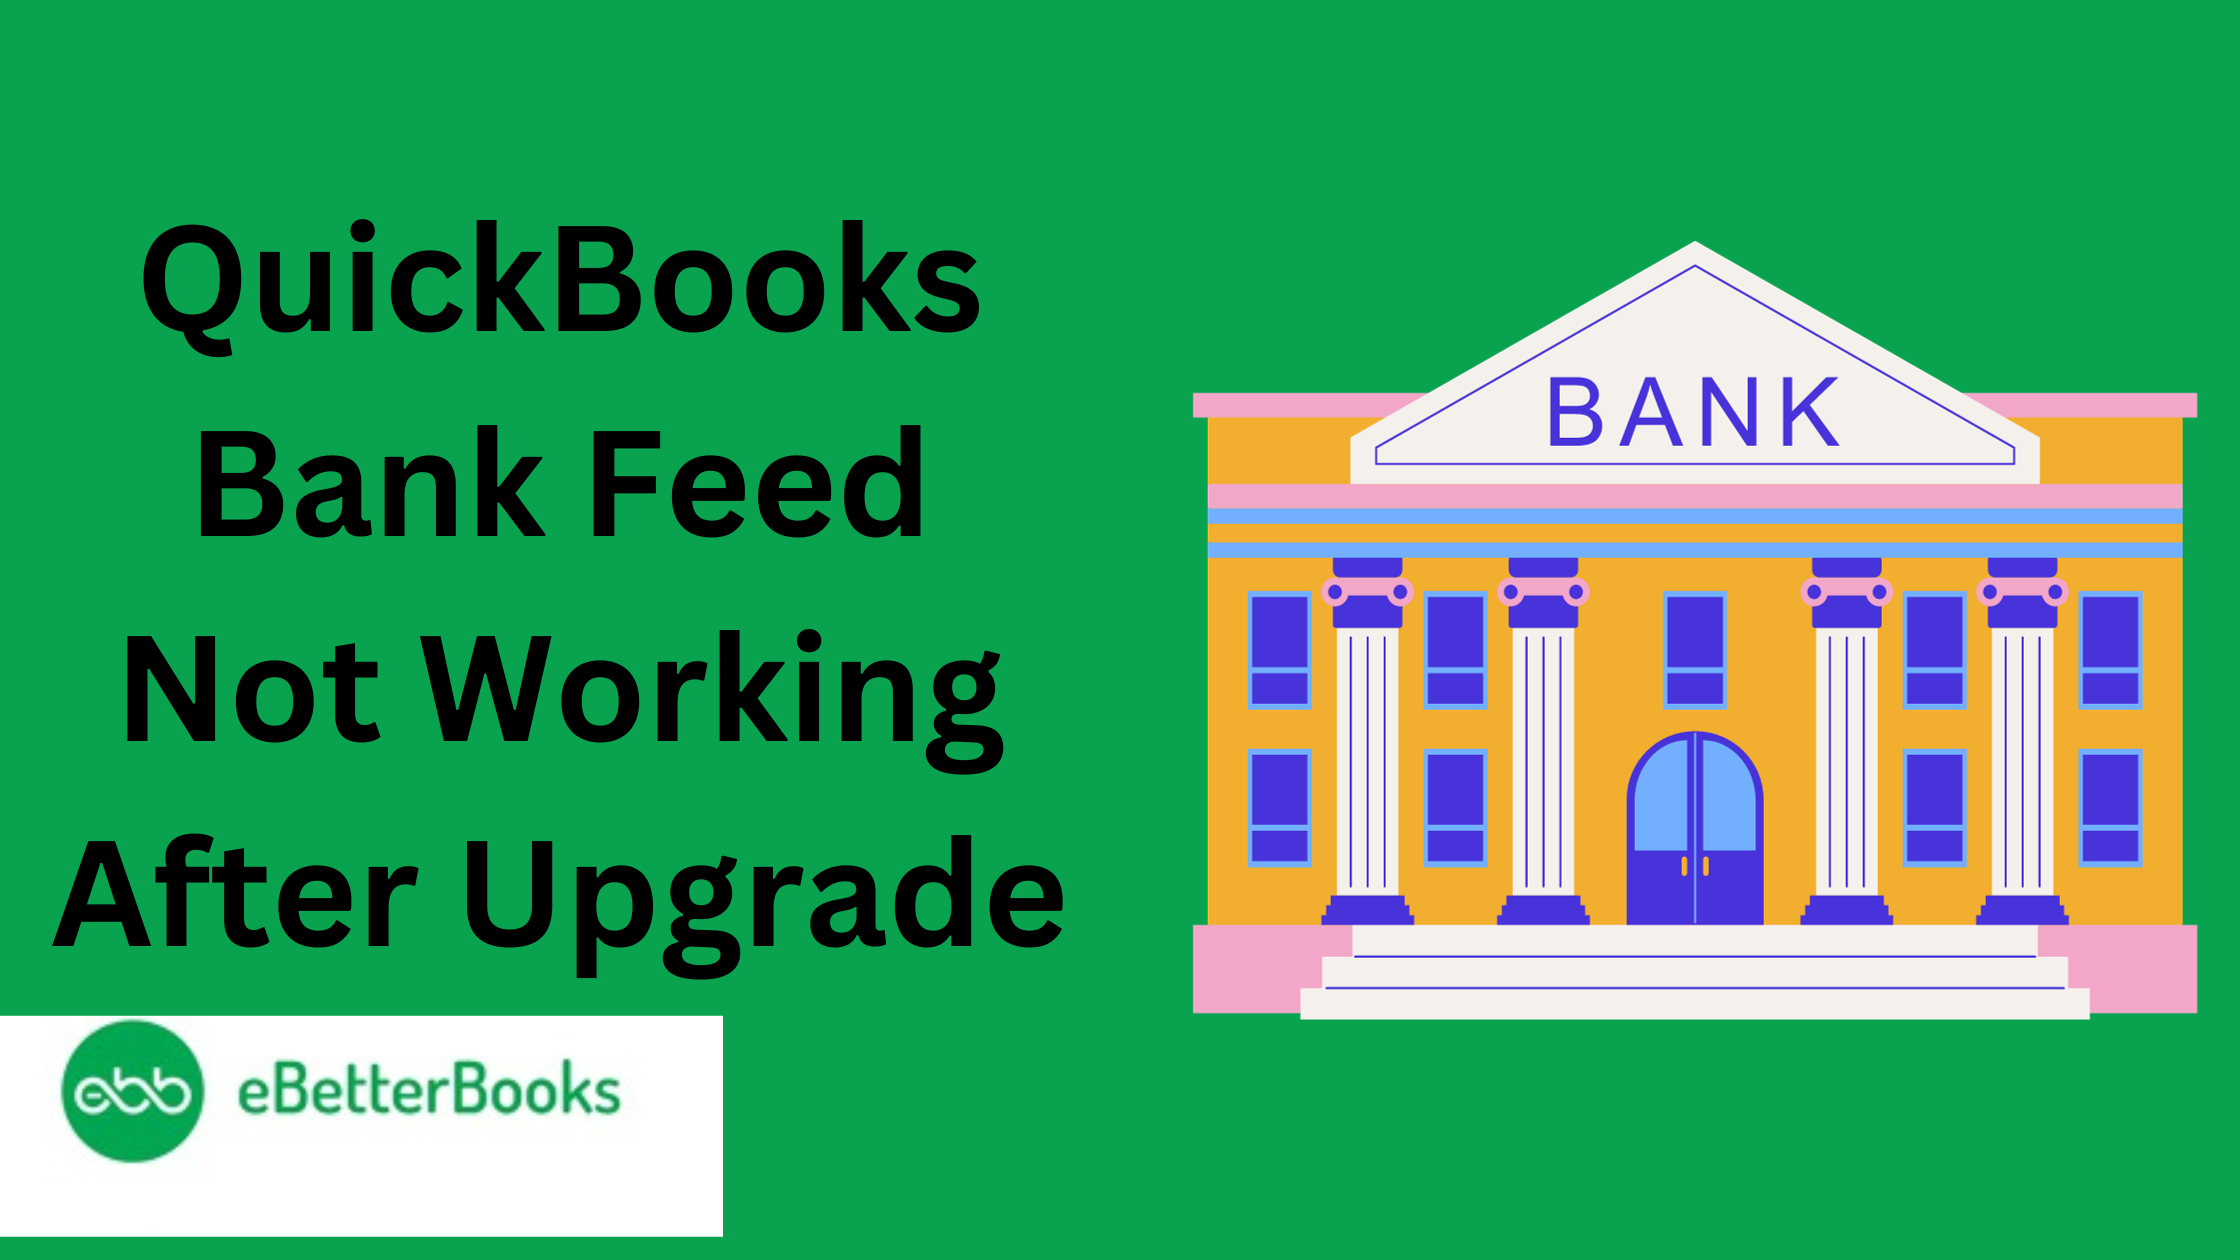 QuickBooks Bank Feed Not Working After Upgrade